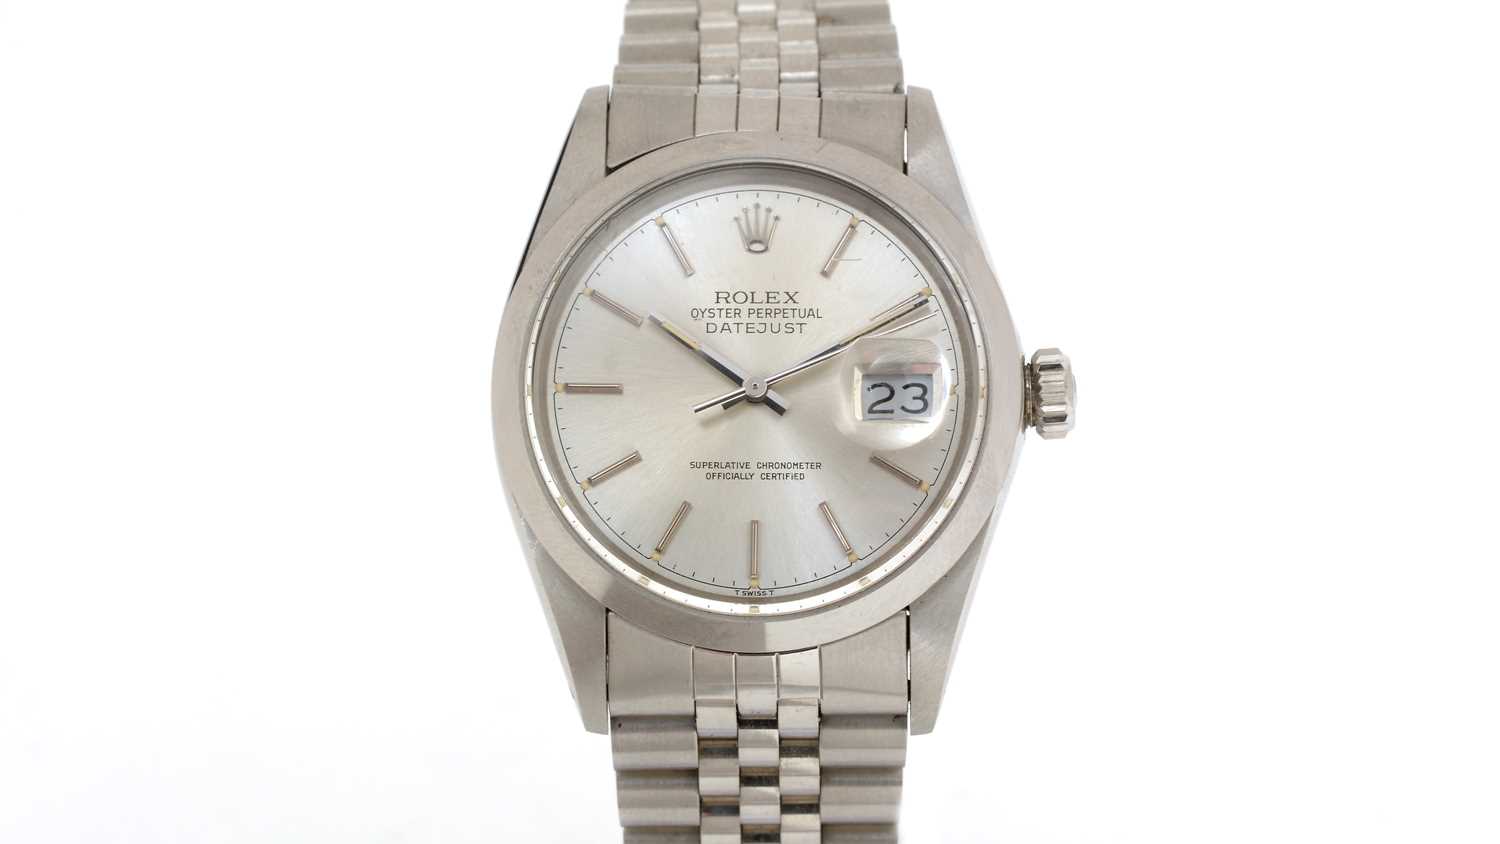 Lot 432 - Rolex Oyster Perpetual Datejust: a steel-cased automatic wristwatch